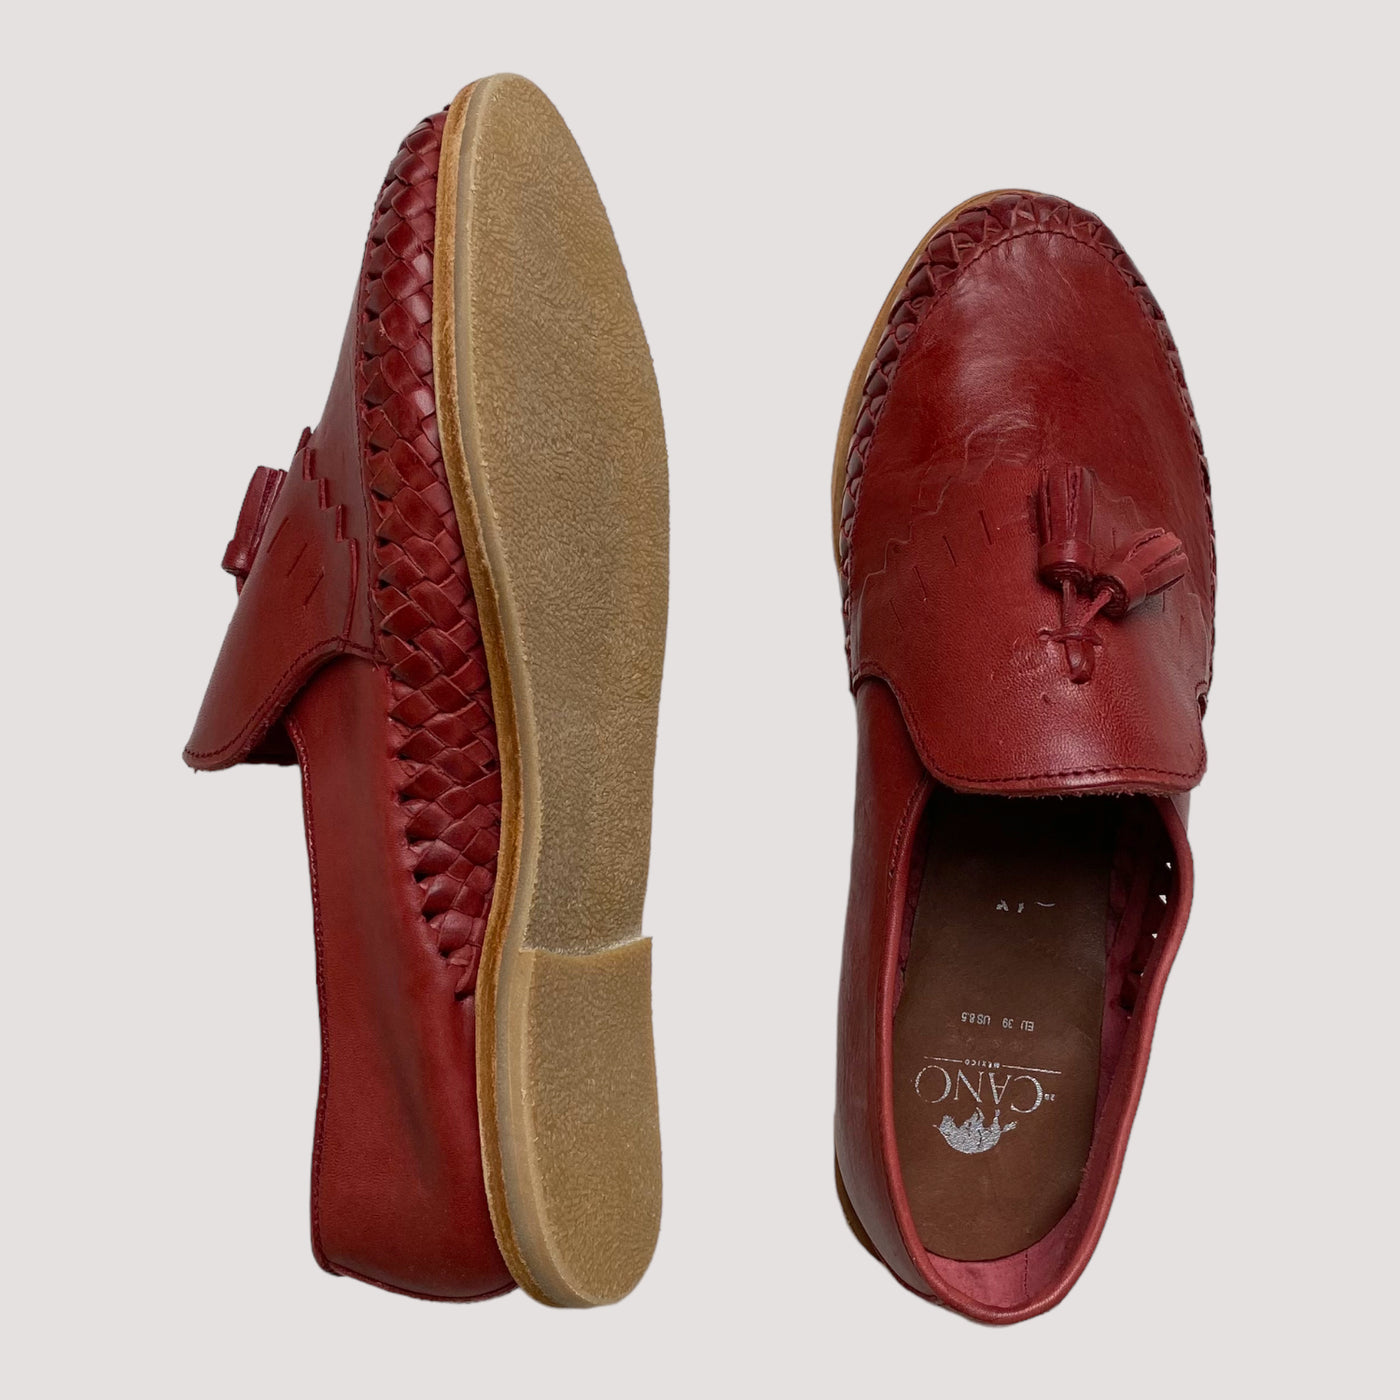 Mario loafer, red | 39